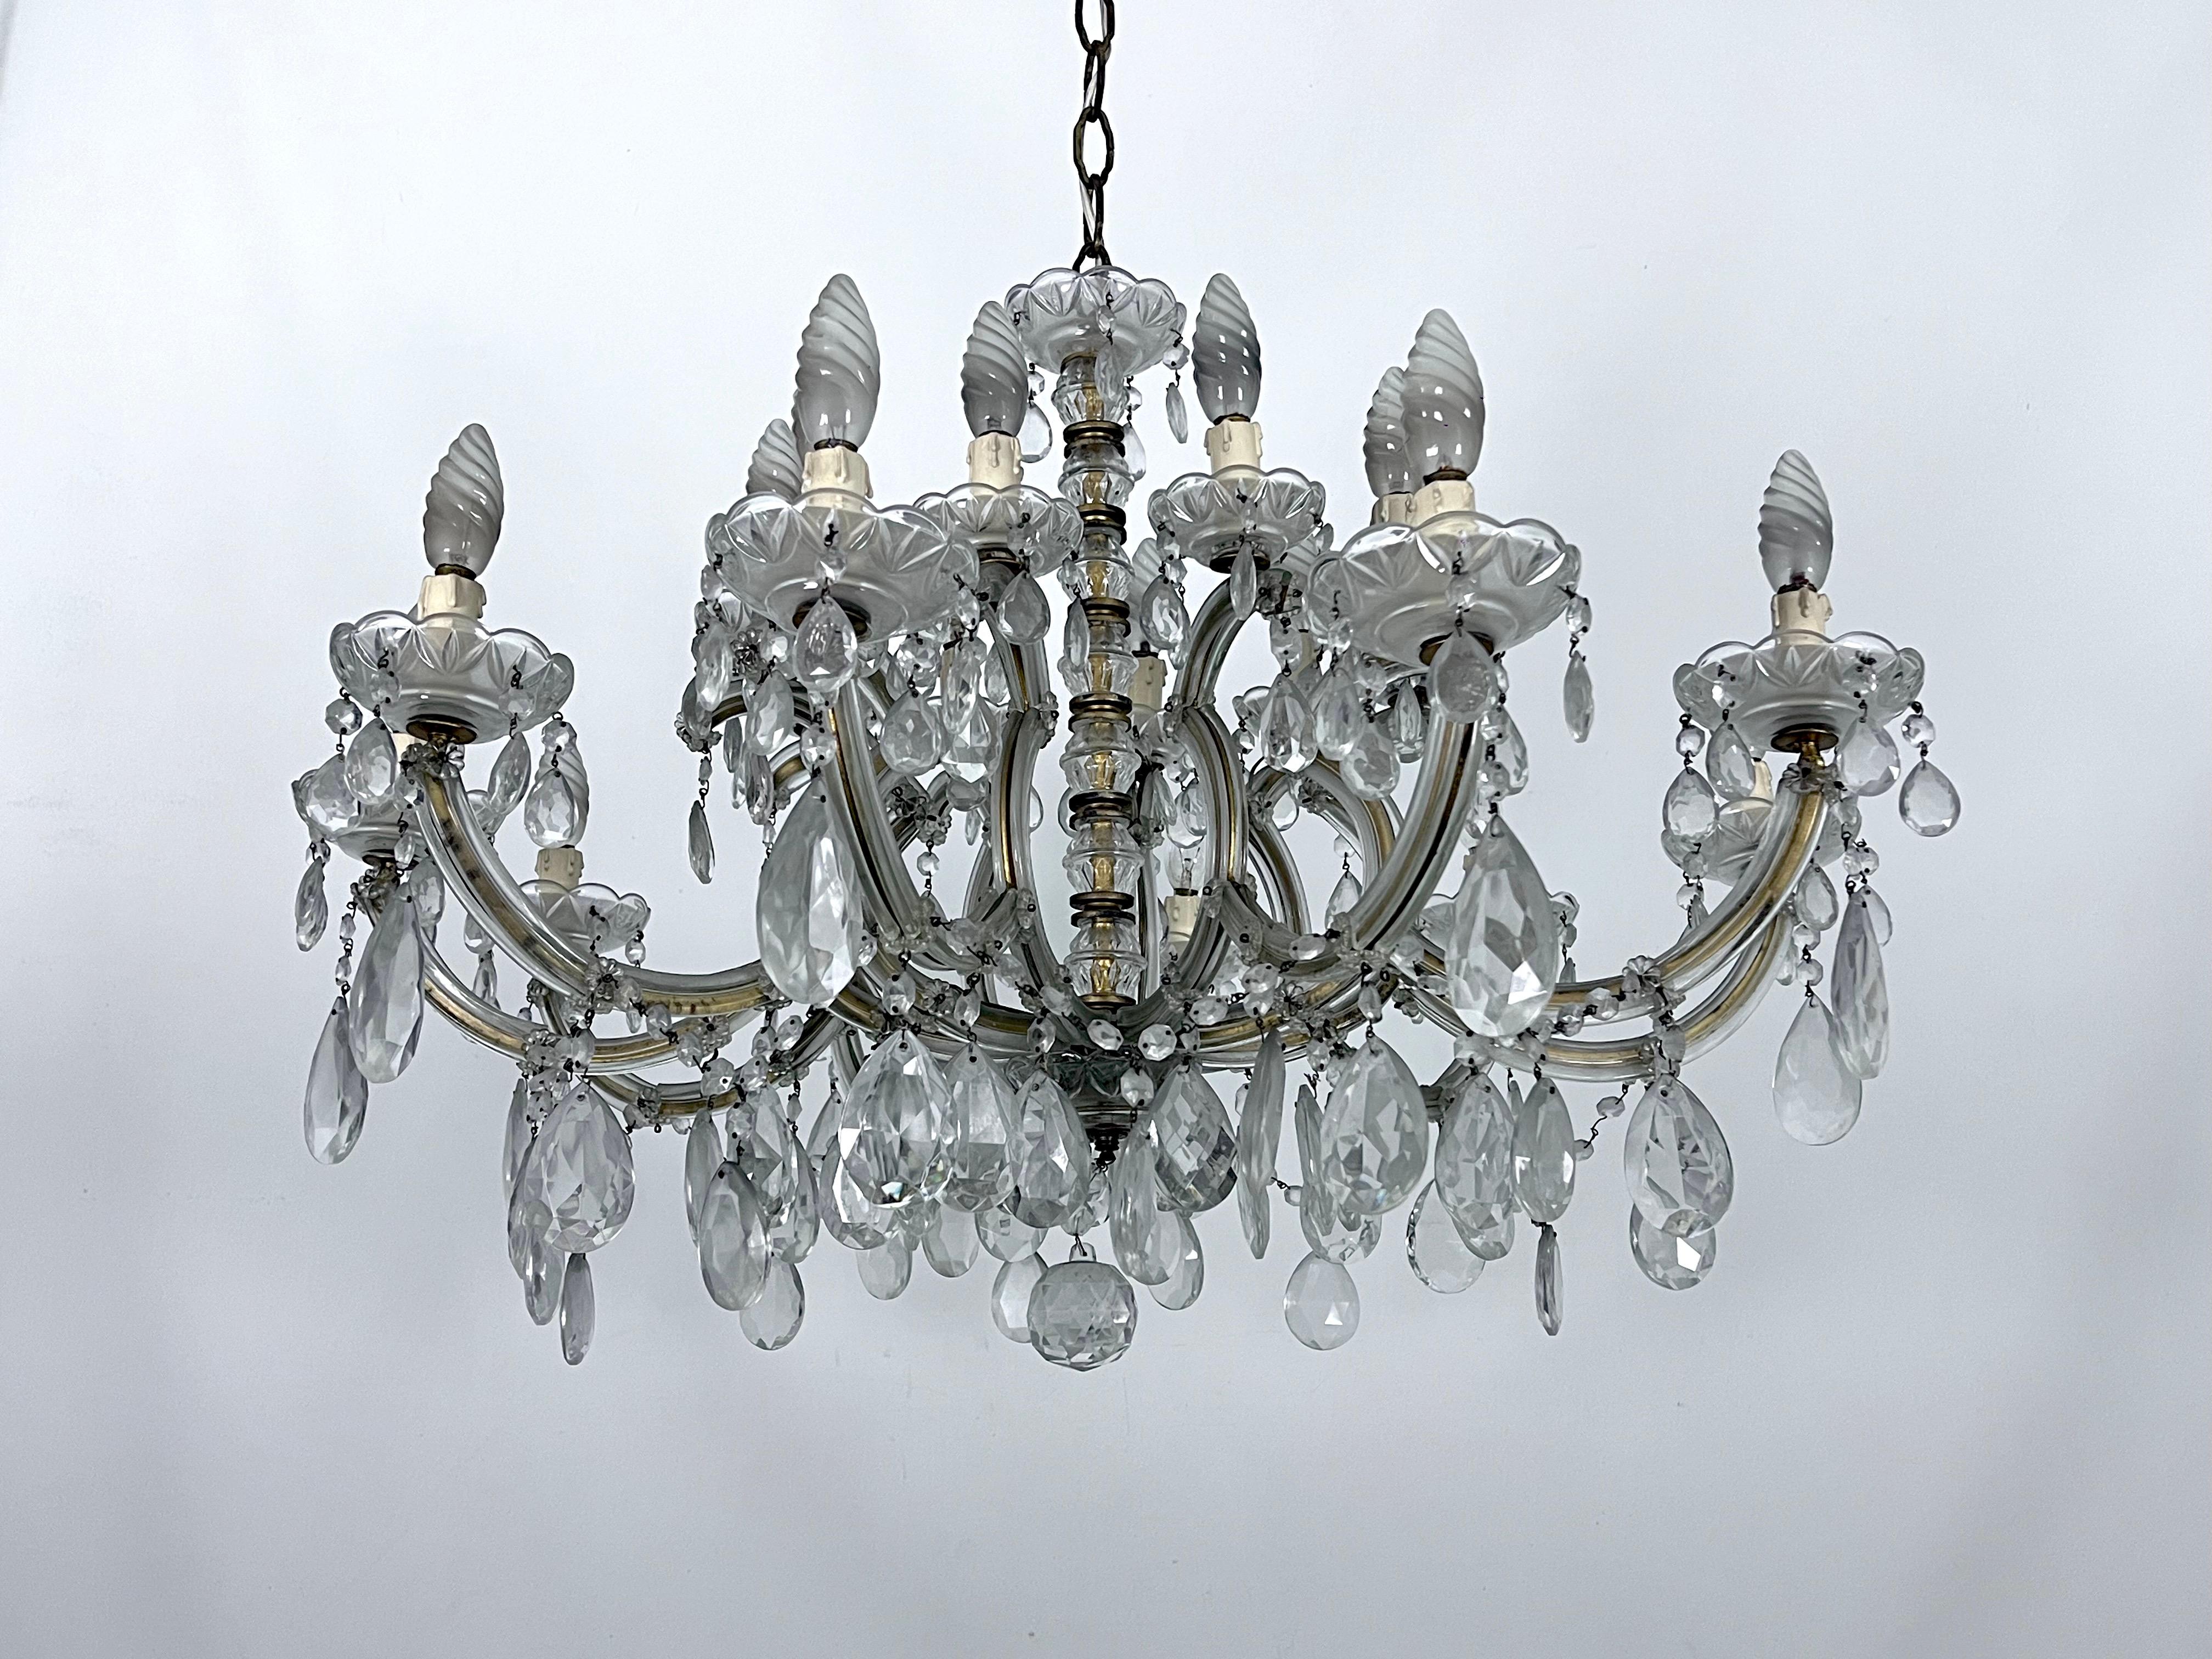 Good vintage condition with normal trace of age and use for this 20 lights Maria Teresa chandelier produced in Italy during the 40s. Made from metal and crystal. Full working with EU standard, adaptable on demand for USA standard. Height of fixture